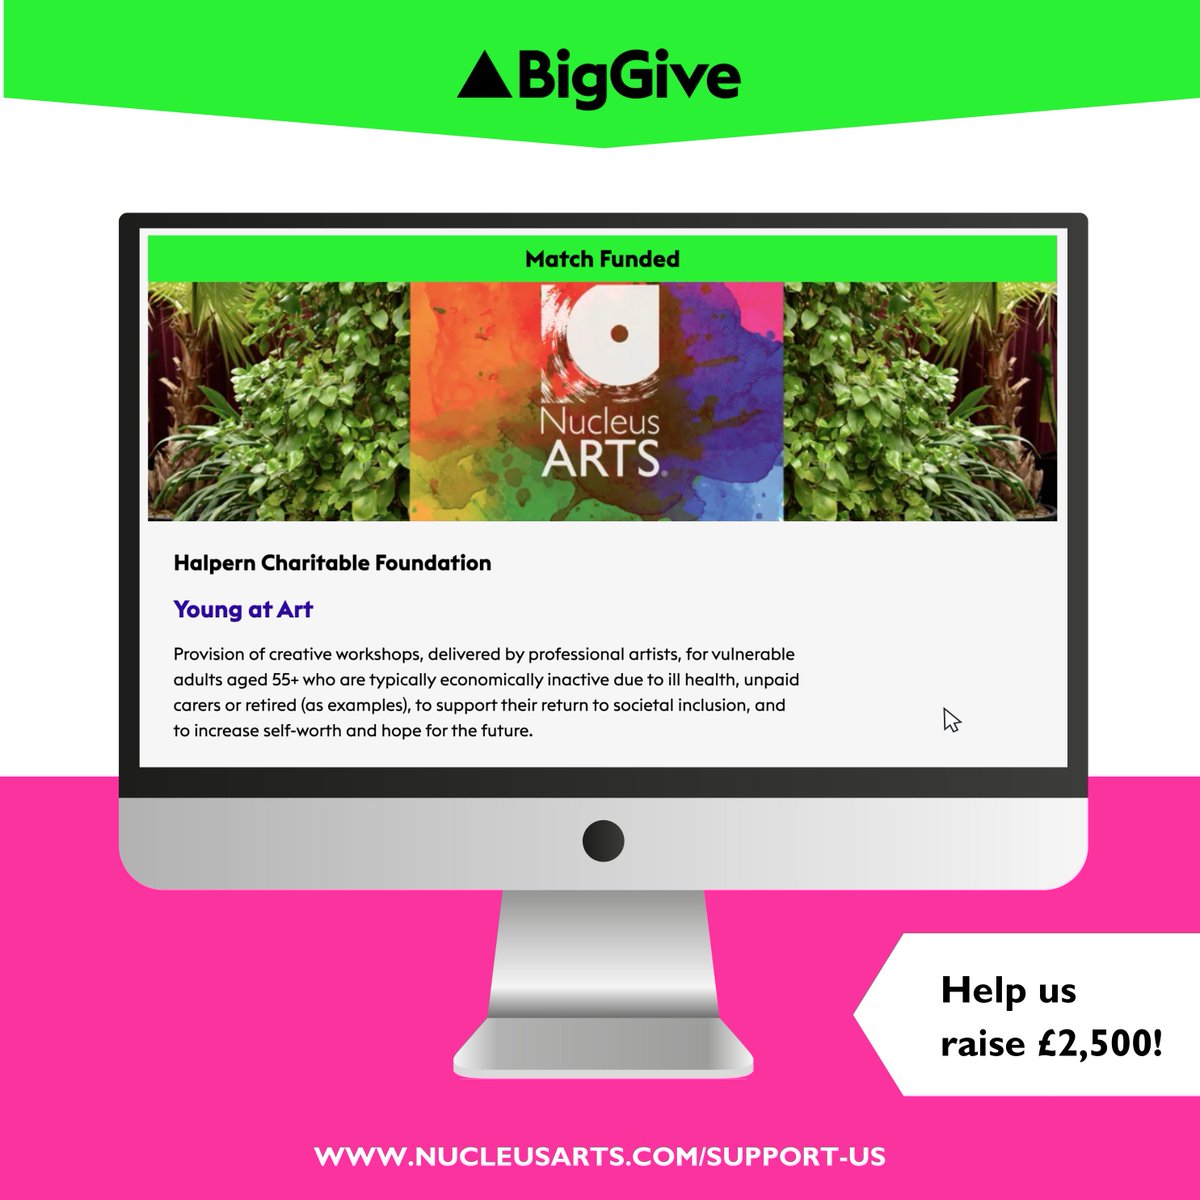 Our Big Give 7 day fundraising campaign will be live next week! Part of Arts for Impact 2024 - From helping with mental health to improving social skills, arts and culture can have a huge, meaningful impact on lives. Find our more at donate.biggive.org/artsforimpact24 #BigGive #donate